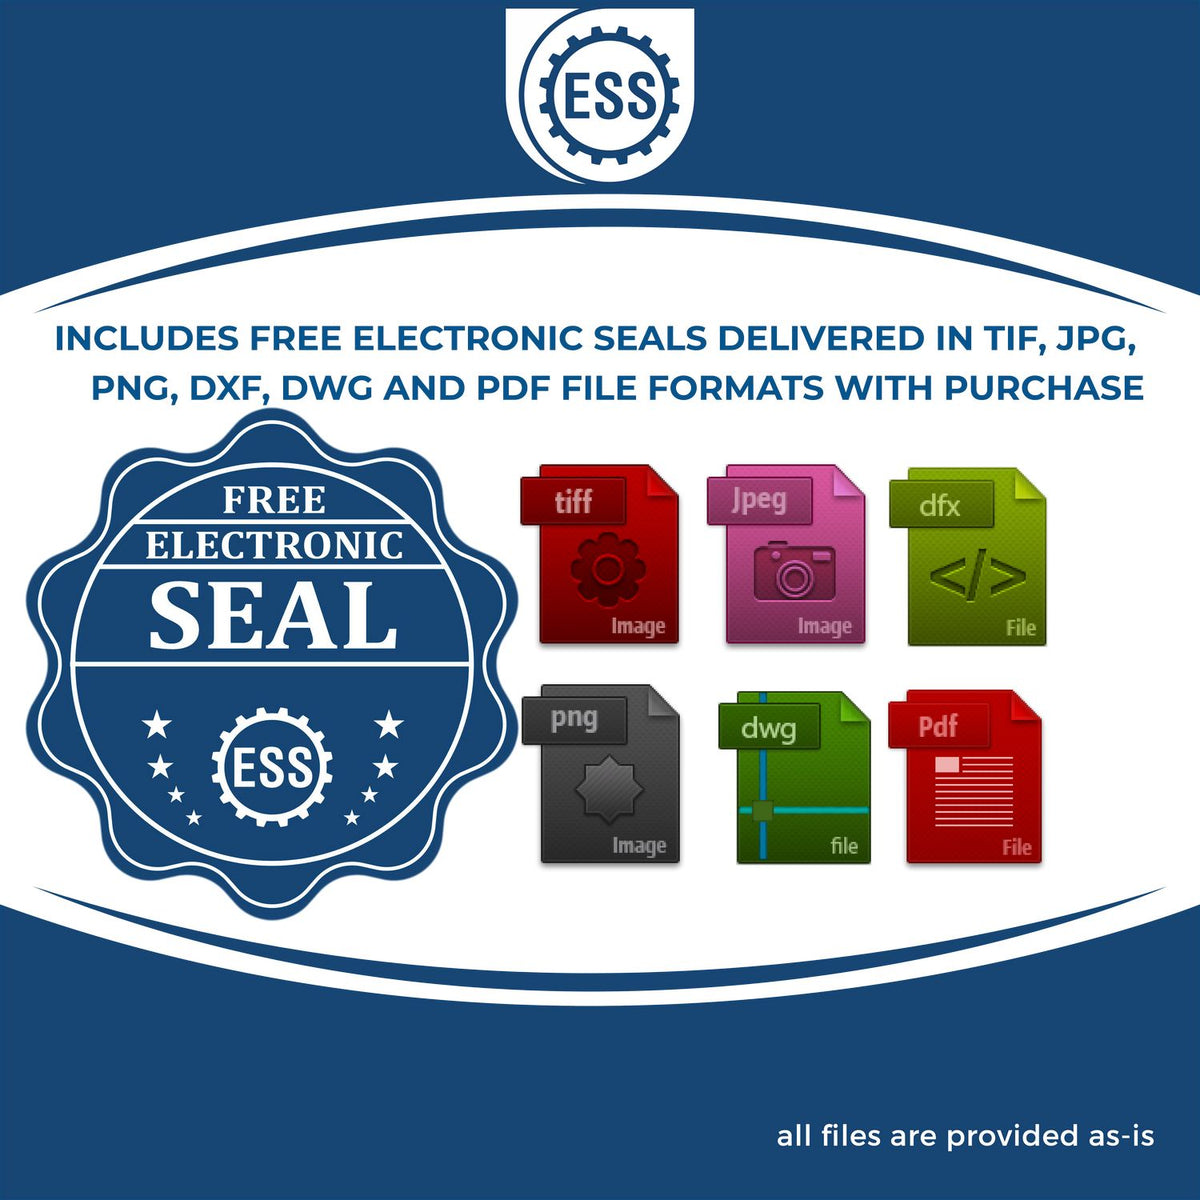 An infographic for the free electronic seal for the Gift Colorado Land Surveyor Seal illustrating the different file type icons such as DXF, DWG, TIF, JPG and PNG.